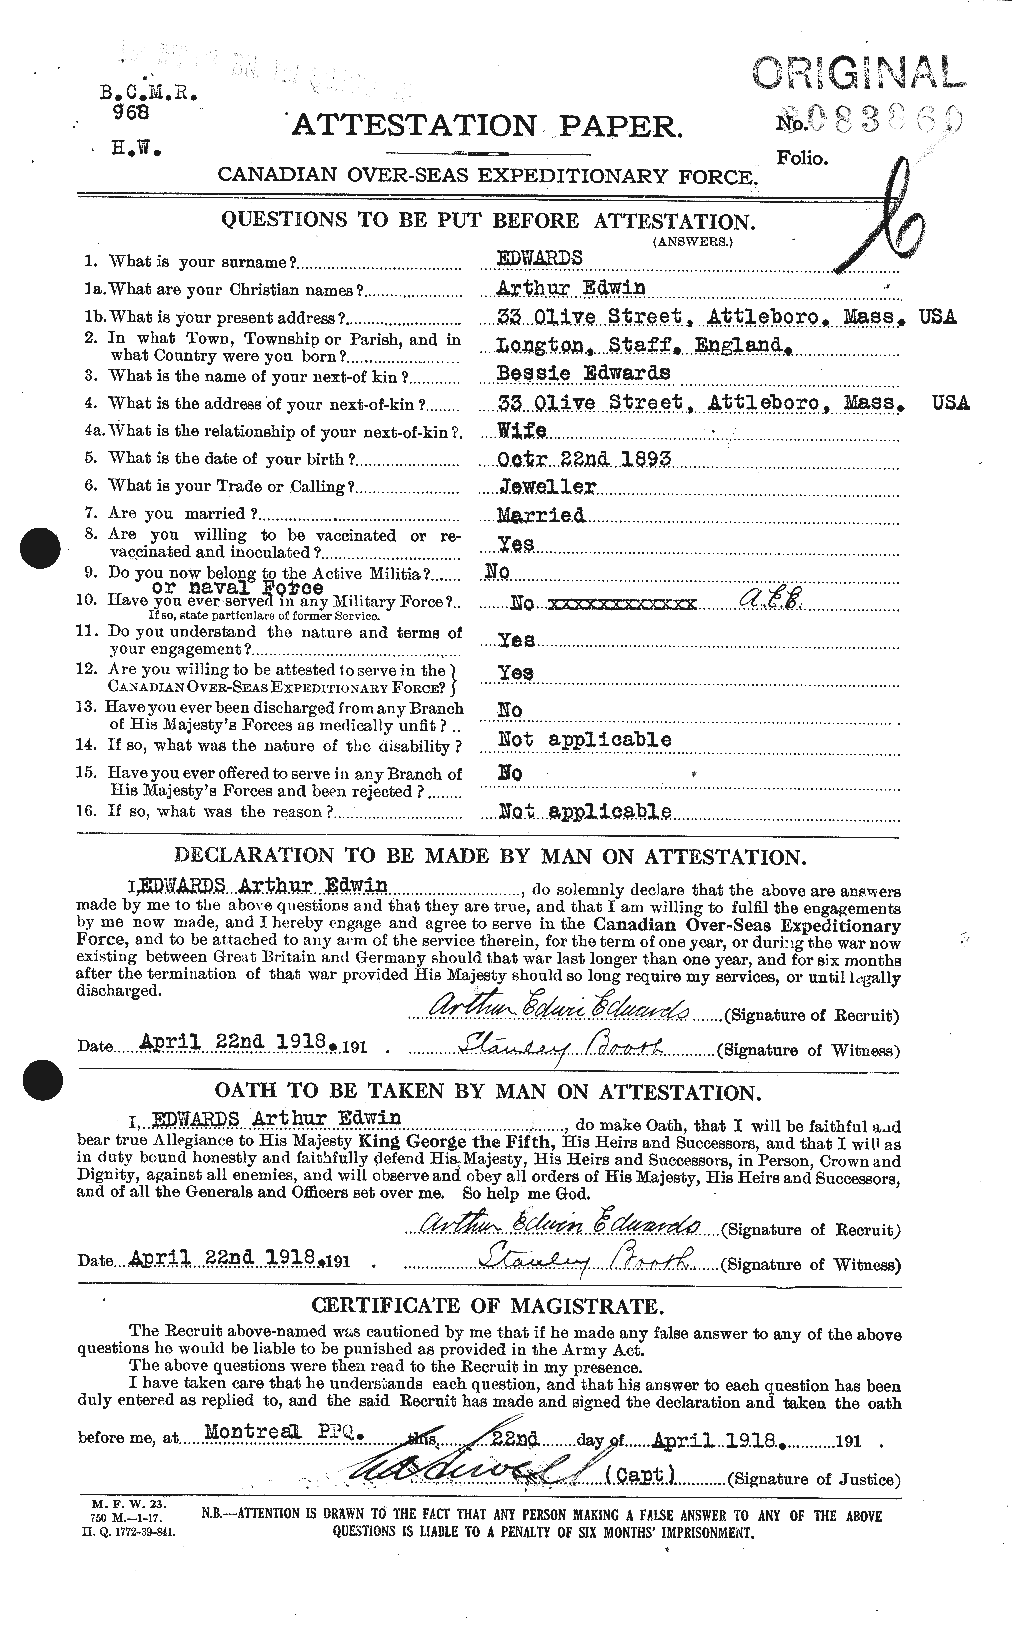 Personnel Records of the First World War - CEF 313138a